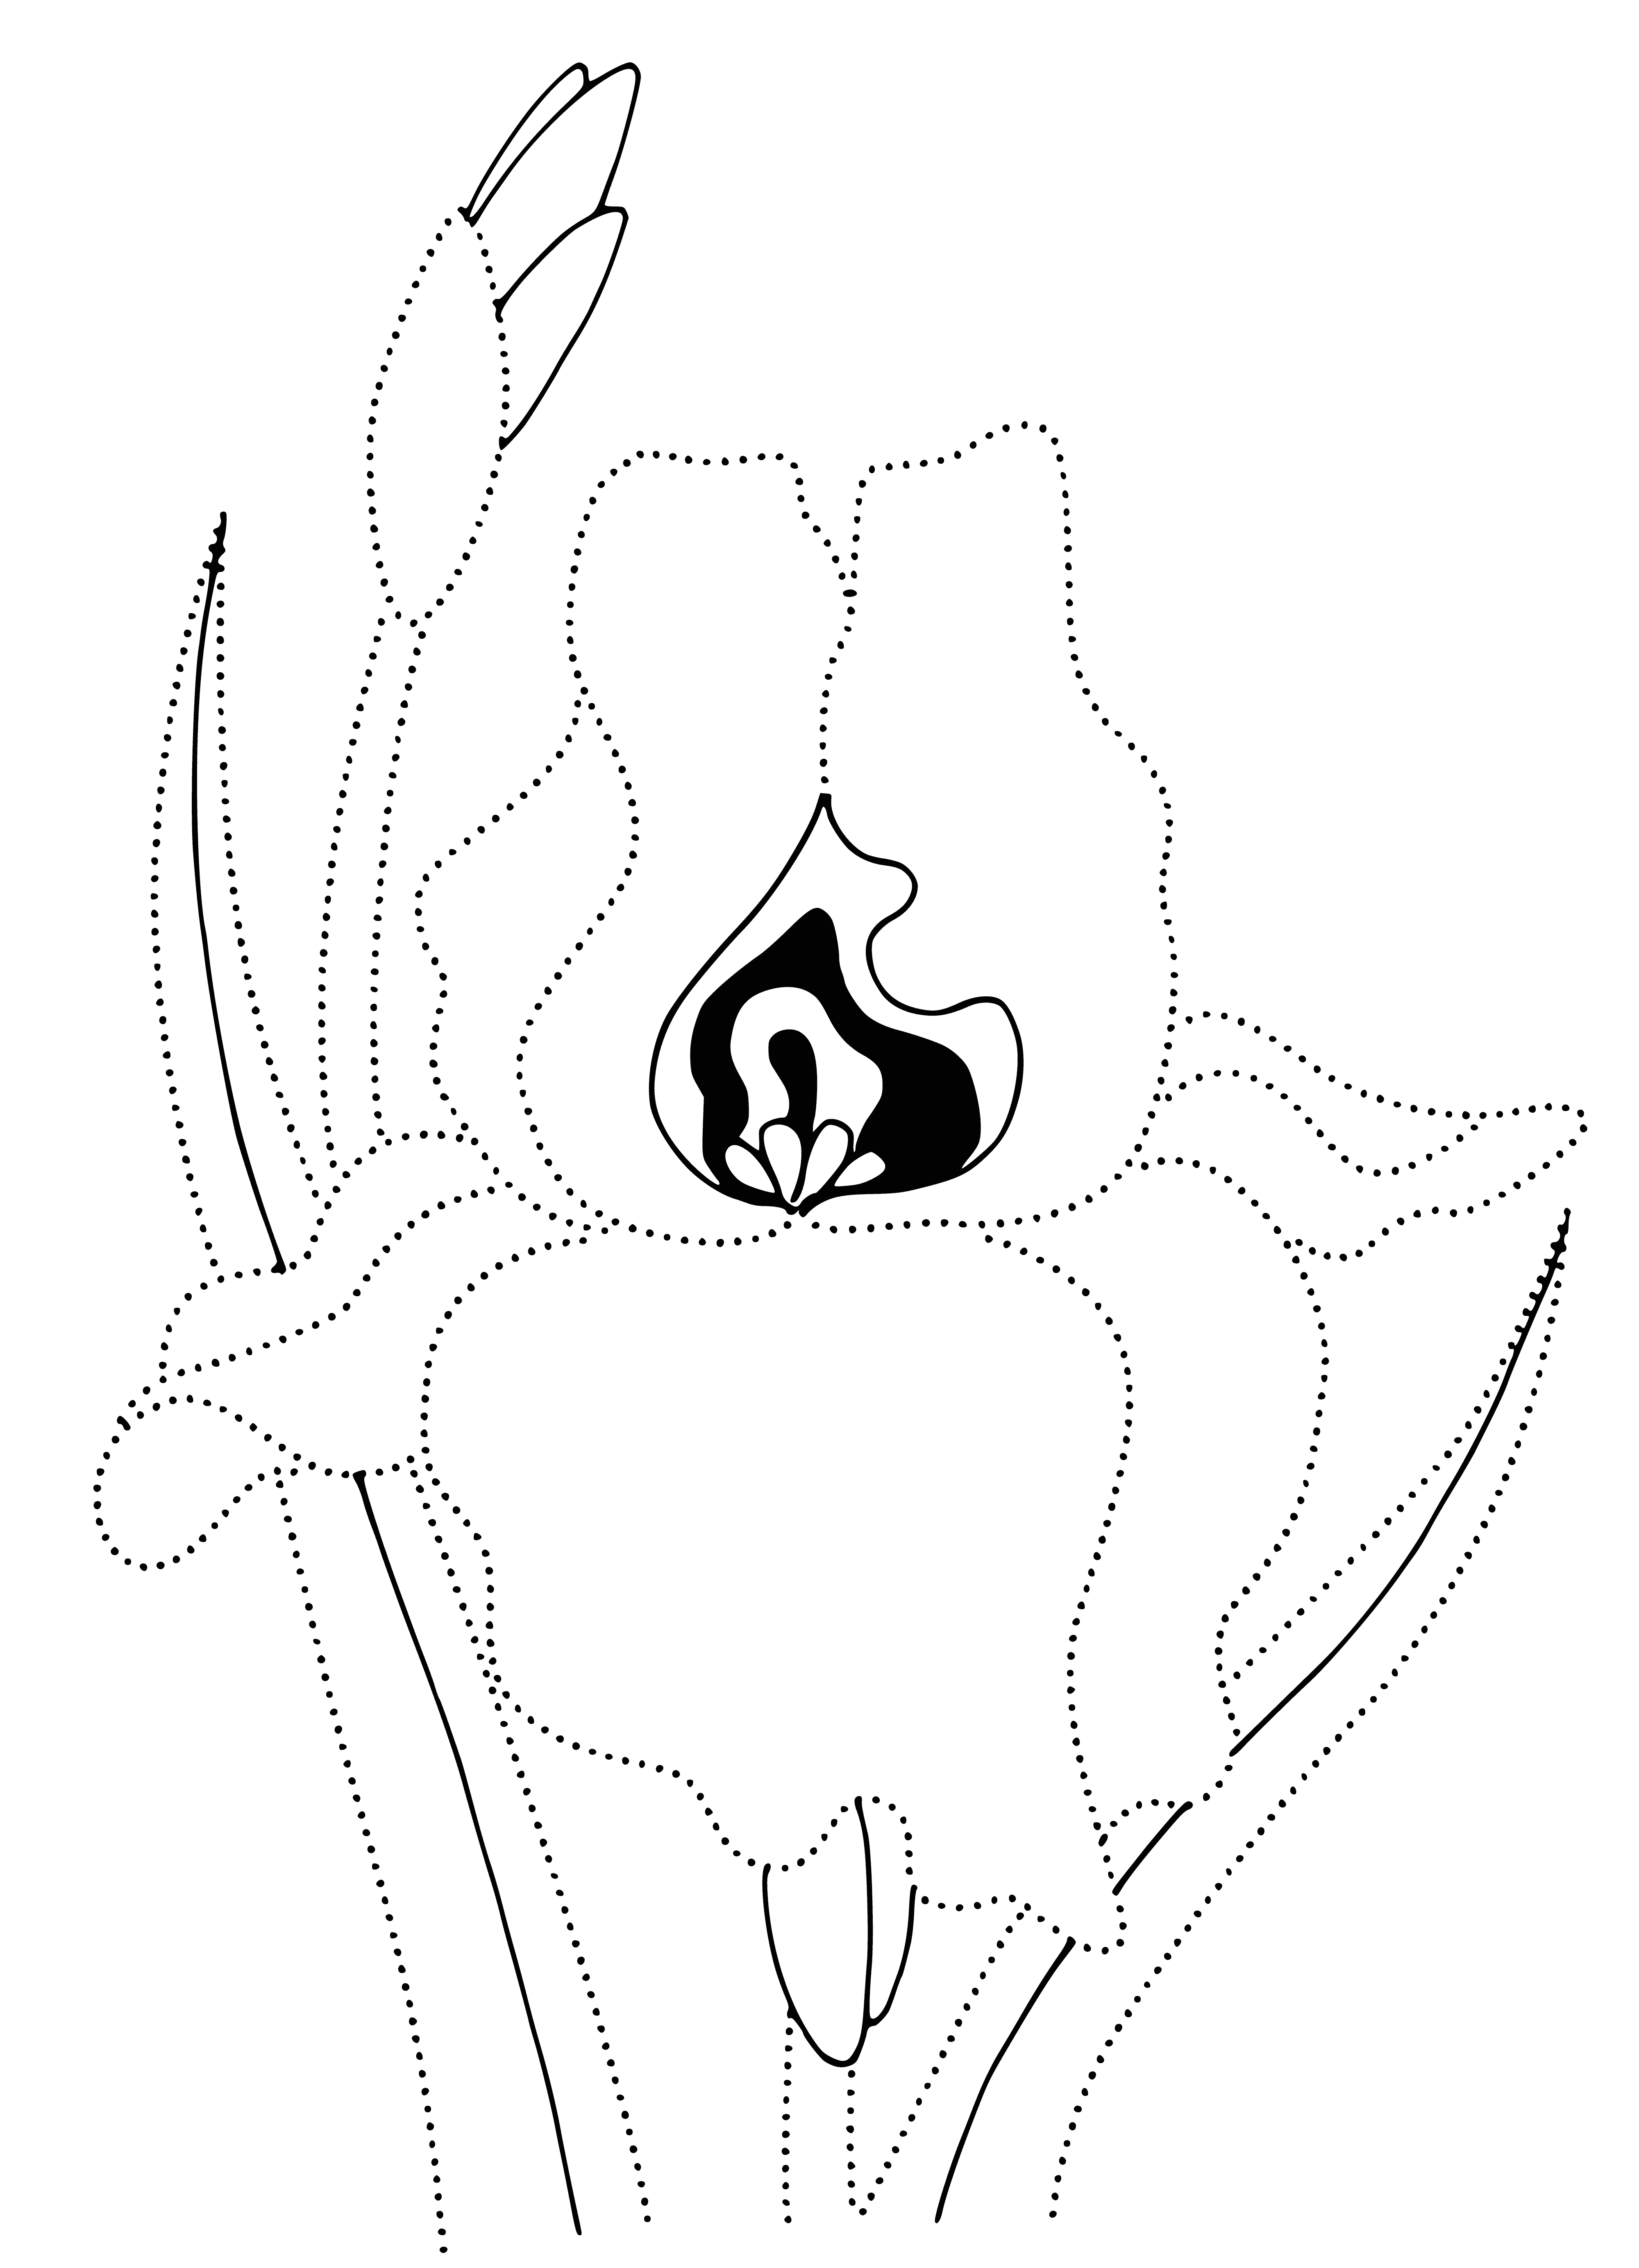 coloring page: A close-up of an iris flower; petals purple/yellow, center yellow, stem green w/ leaves.